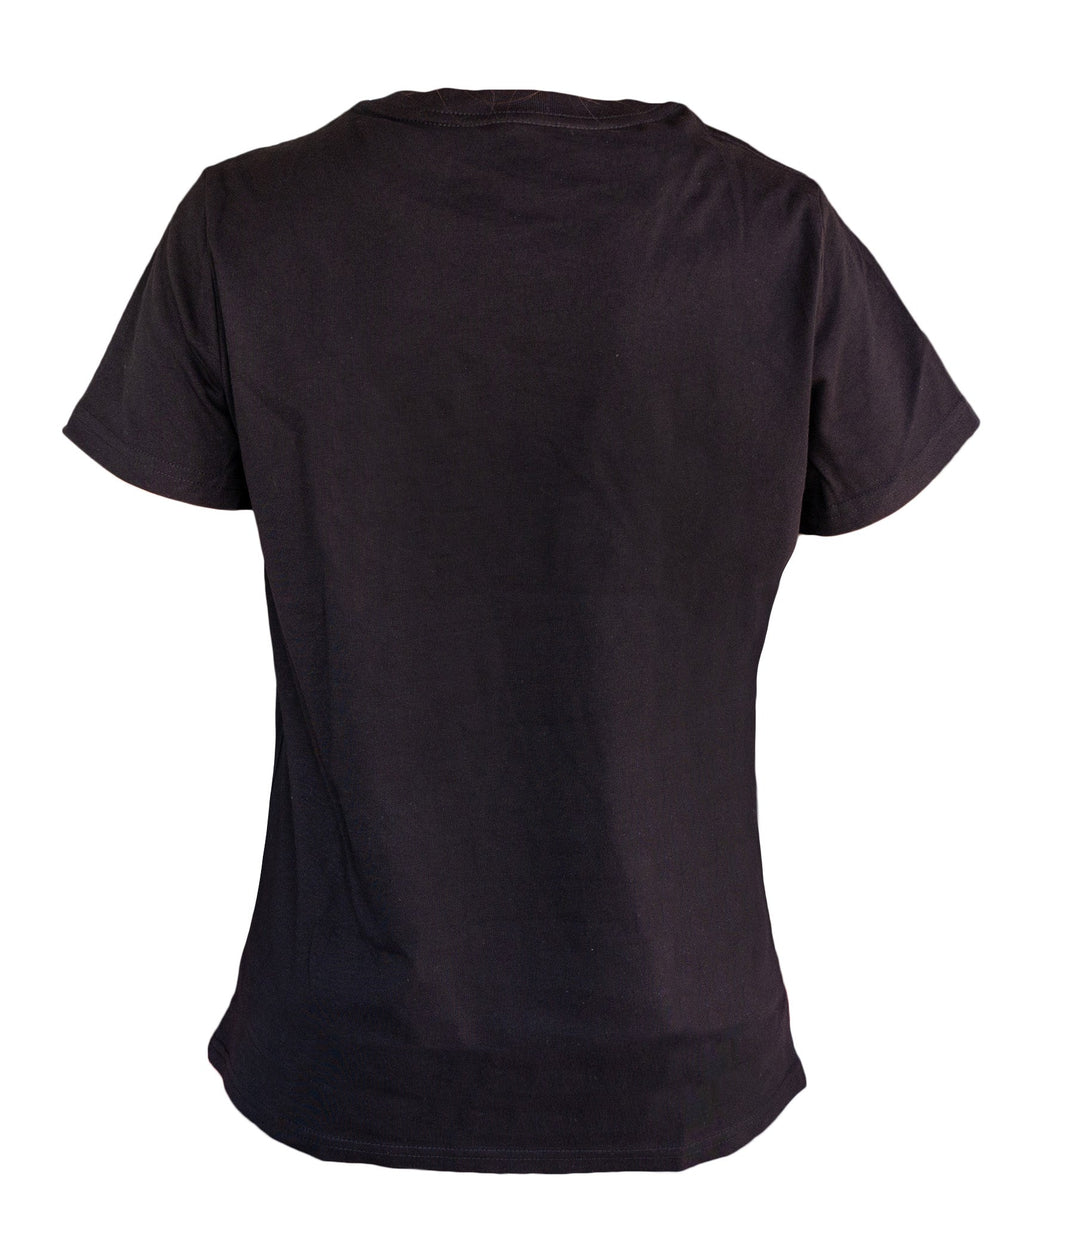 Image of the back of the womens Send It Outlier T-shirt featuring no print on a dark black colored shirt.